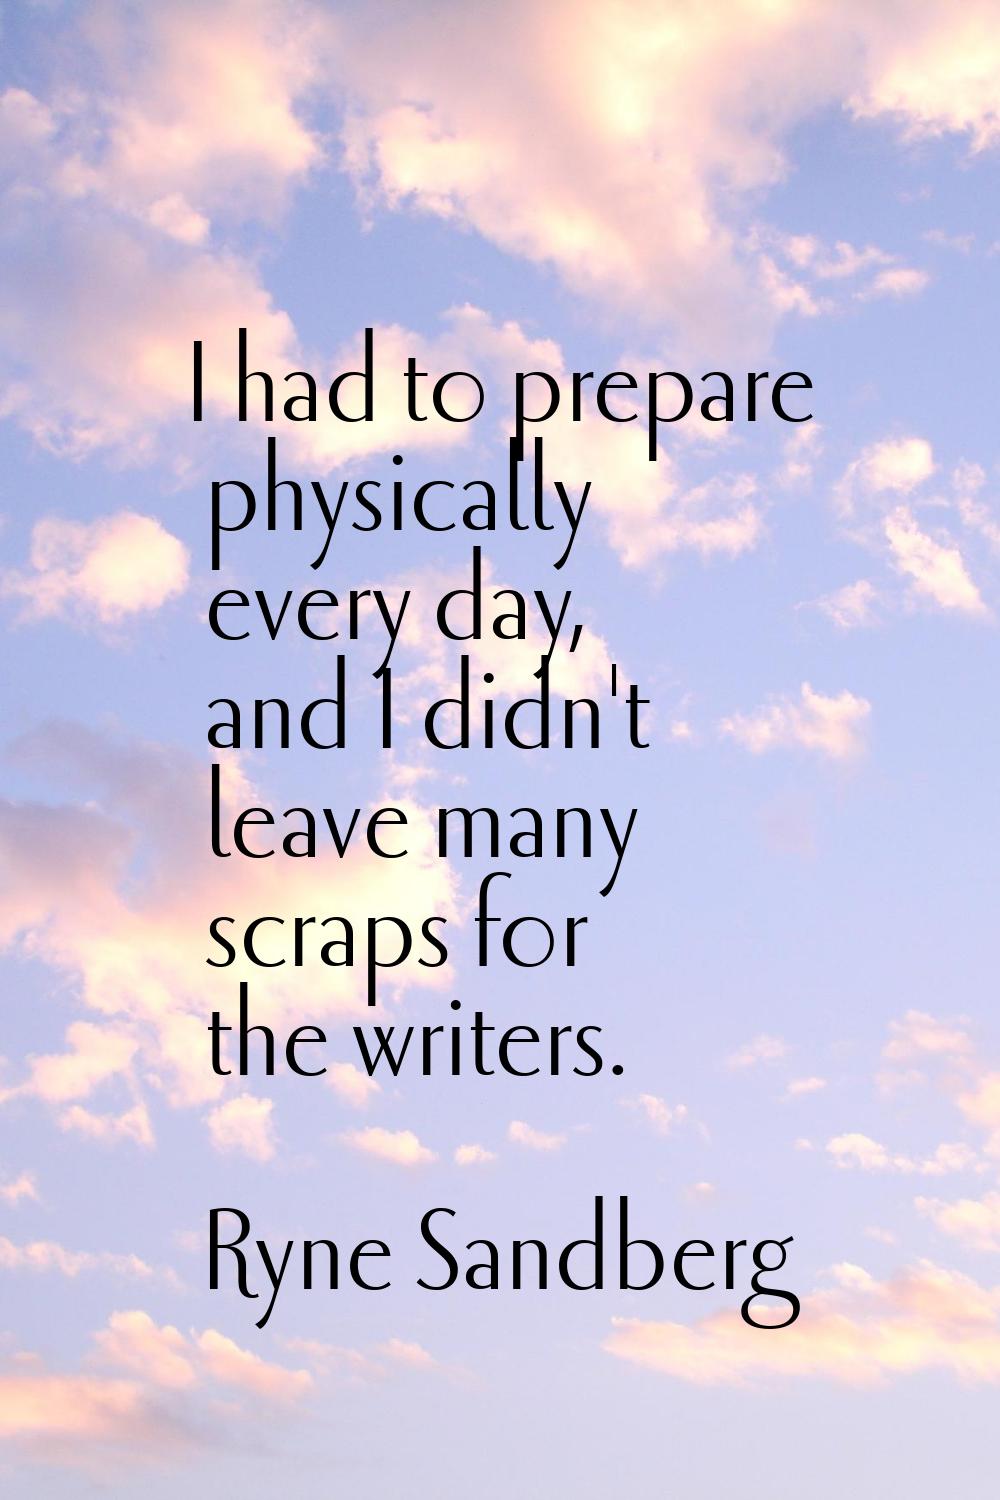 I had to prepare physically every day, and I didn't leave many scraps for the writers.